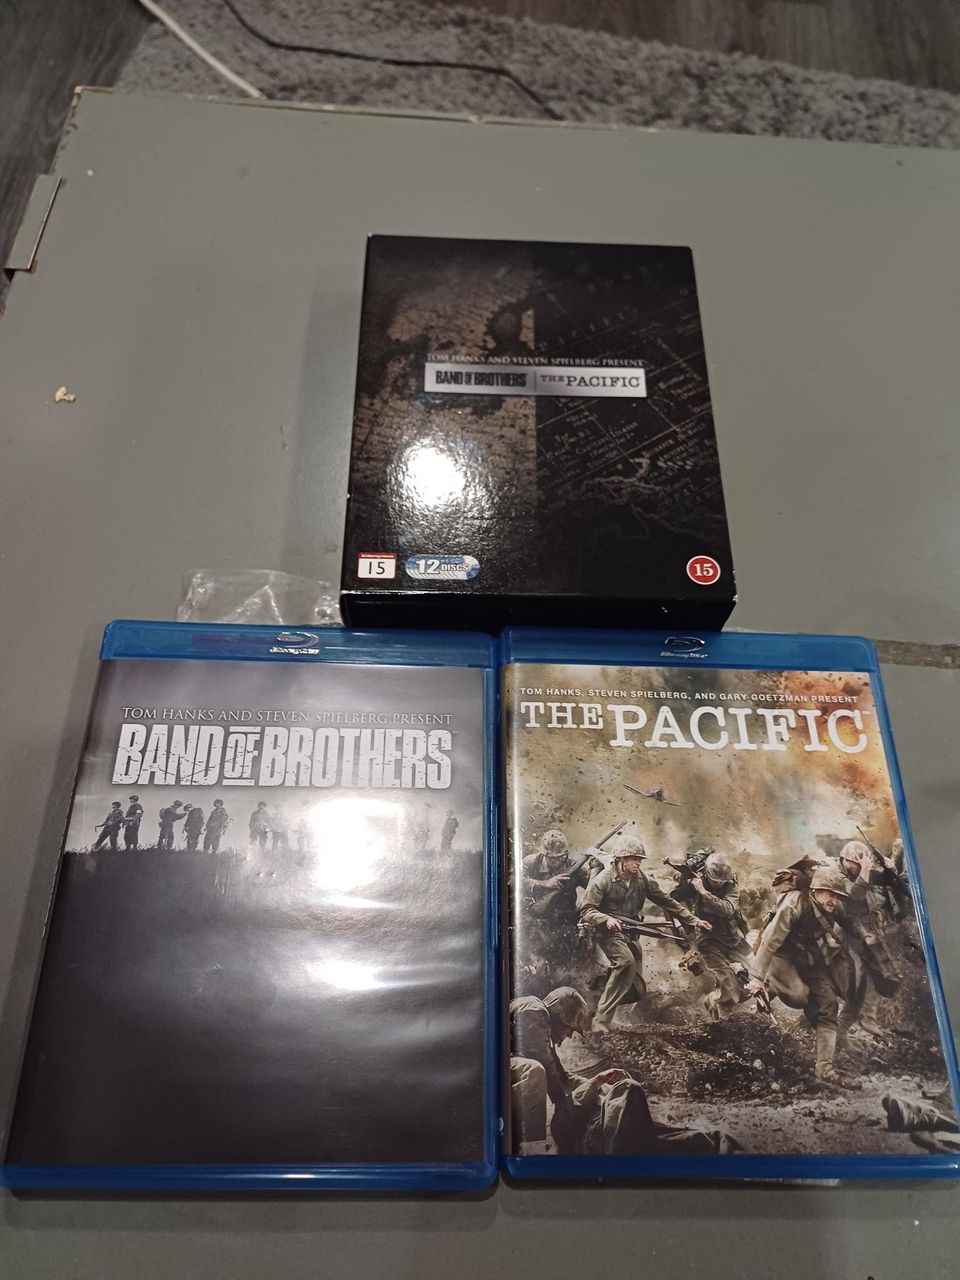 The pacific ja band if brothers blu-rayt